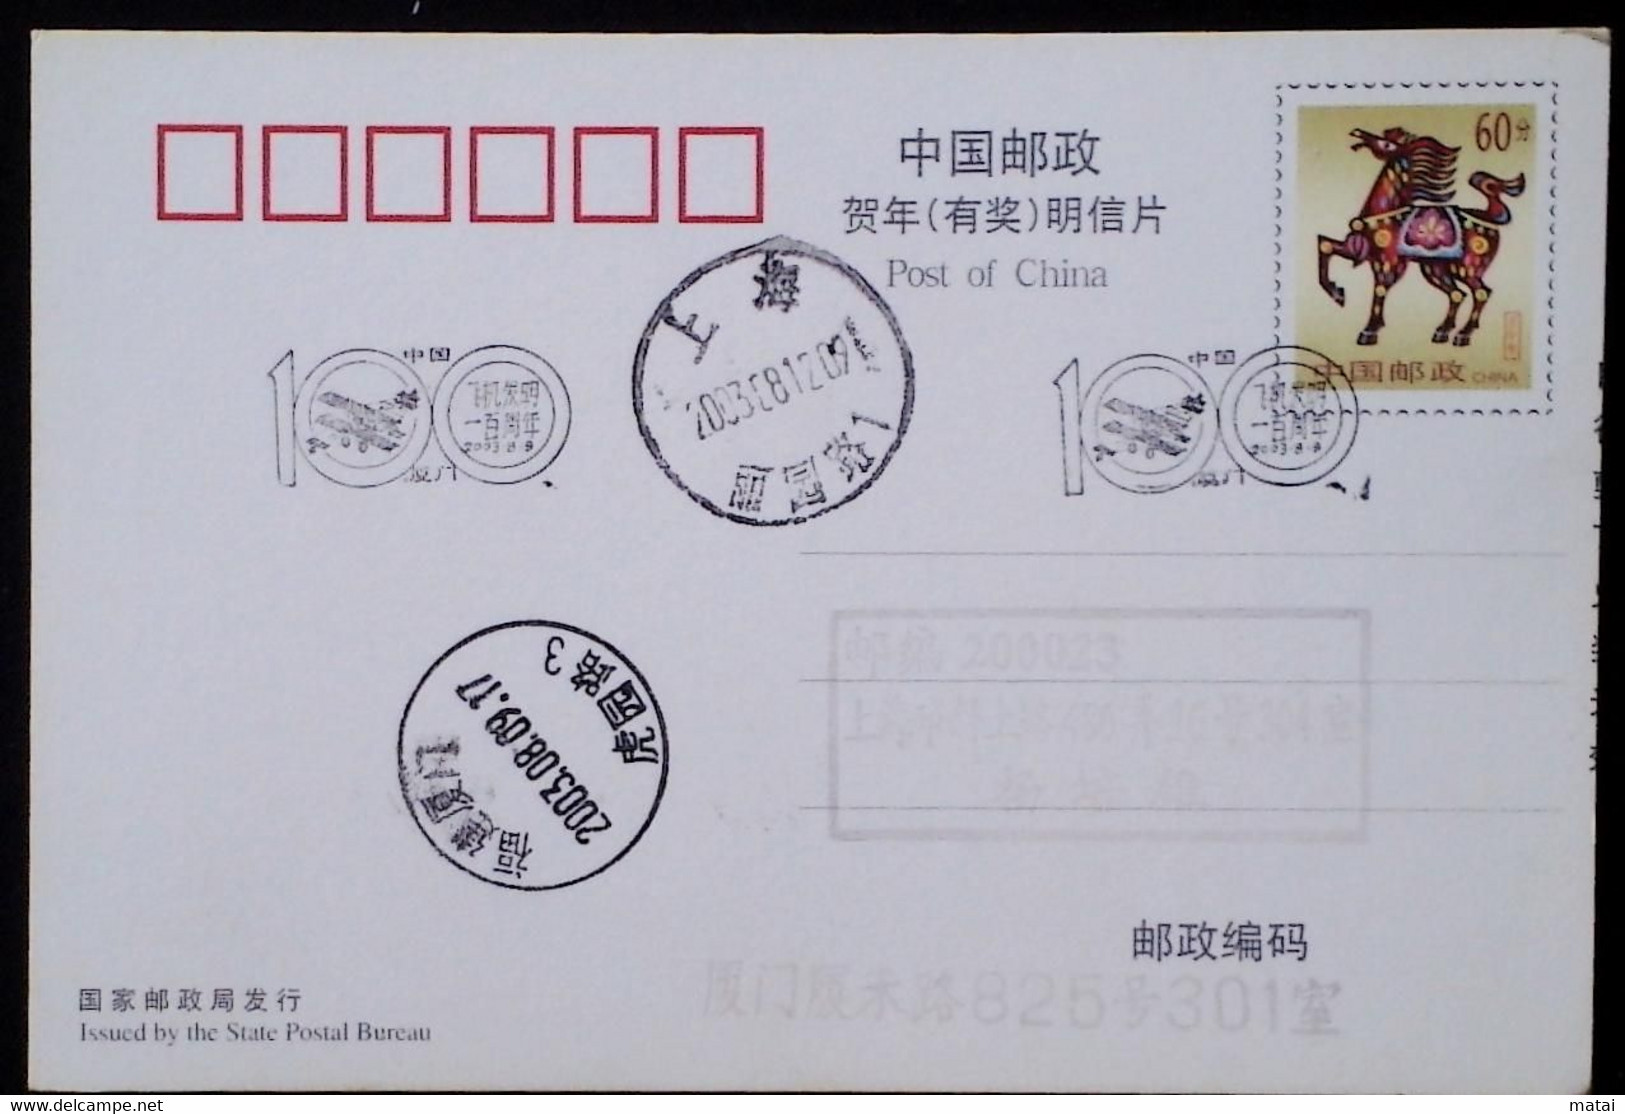 CHINA CHINE  CINA STAMPED  POSTCARD WITH SPECIAL POSTMARK - 97 - Gebruikt